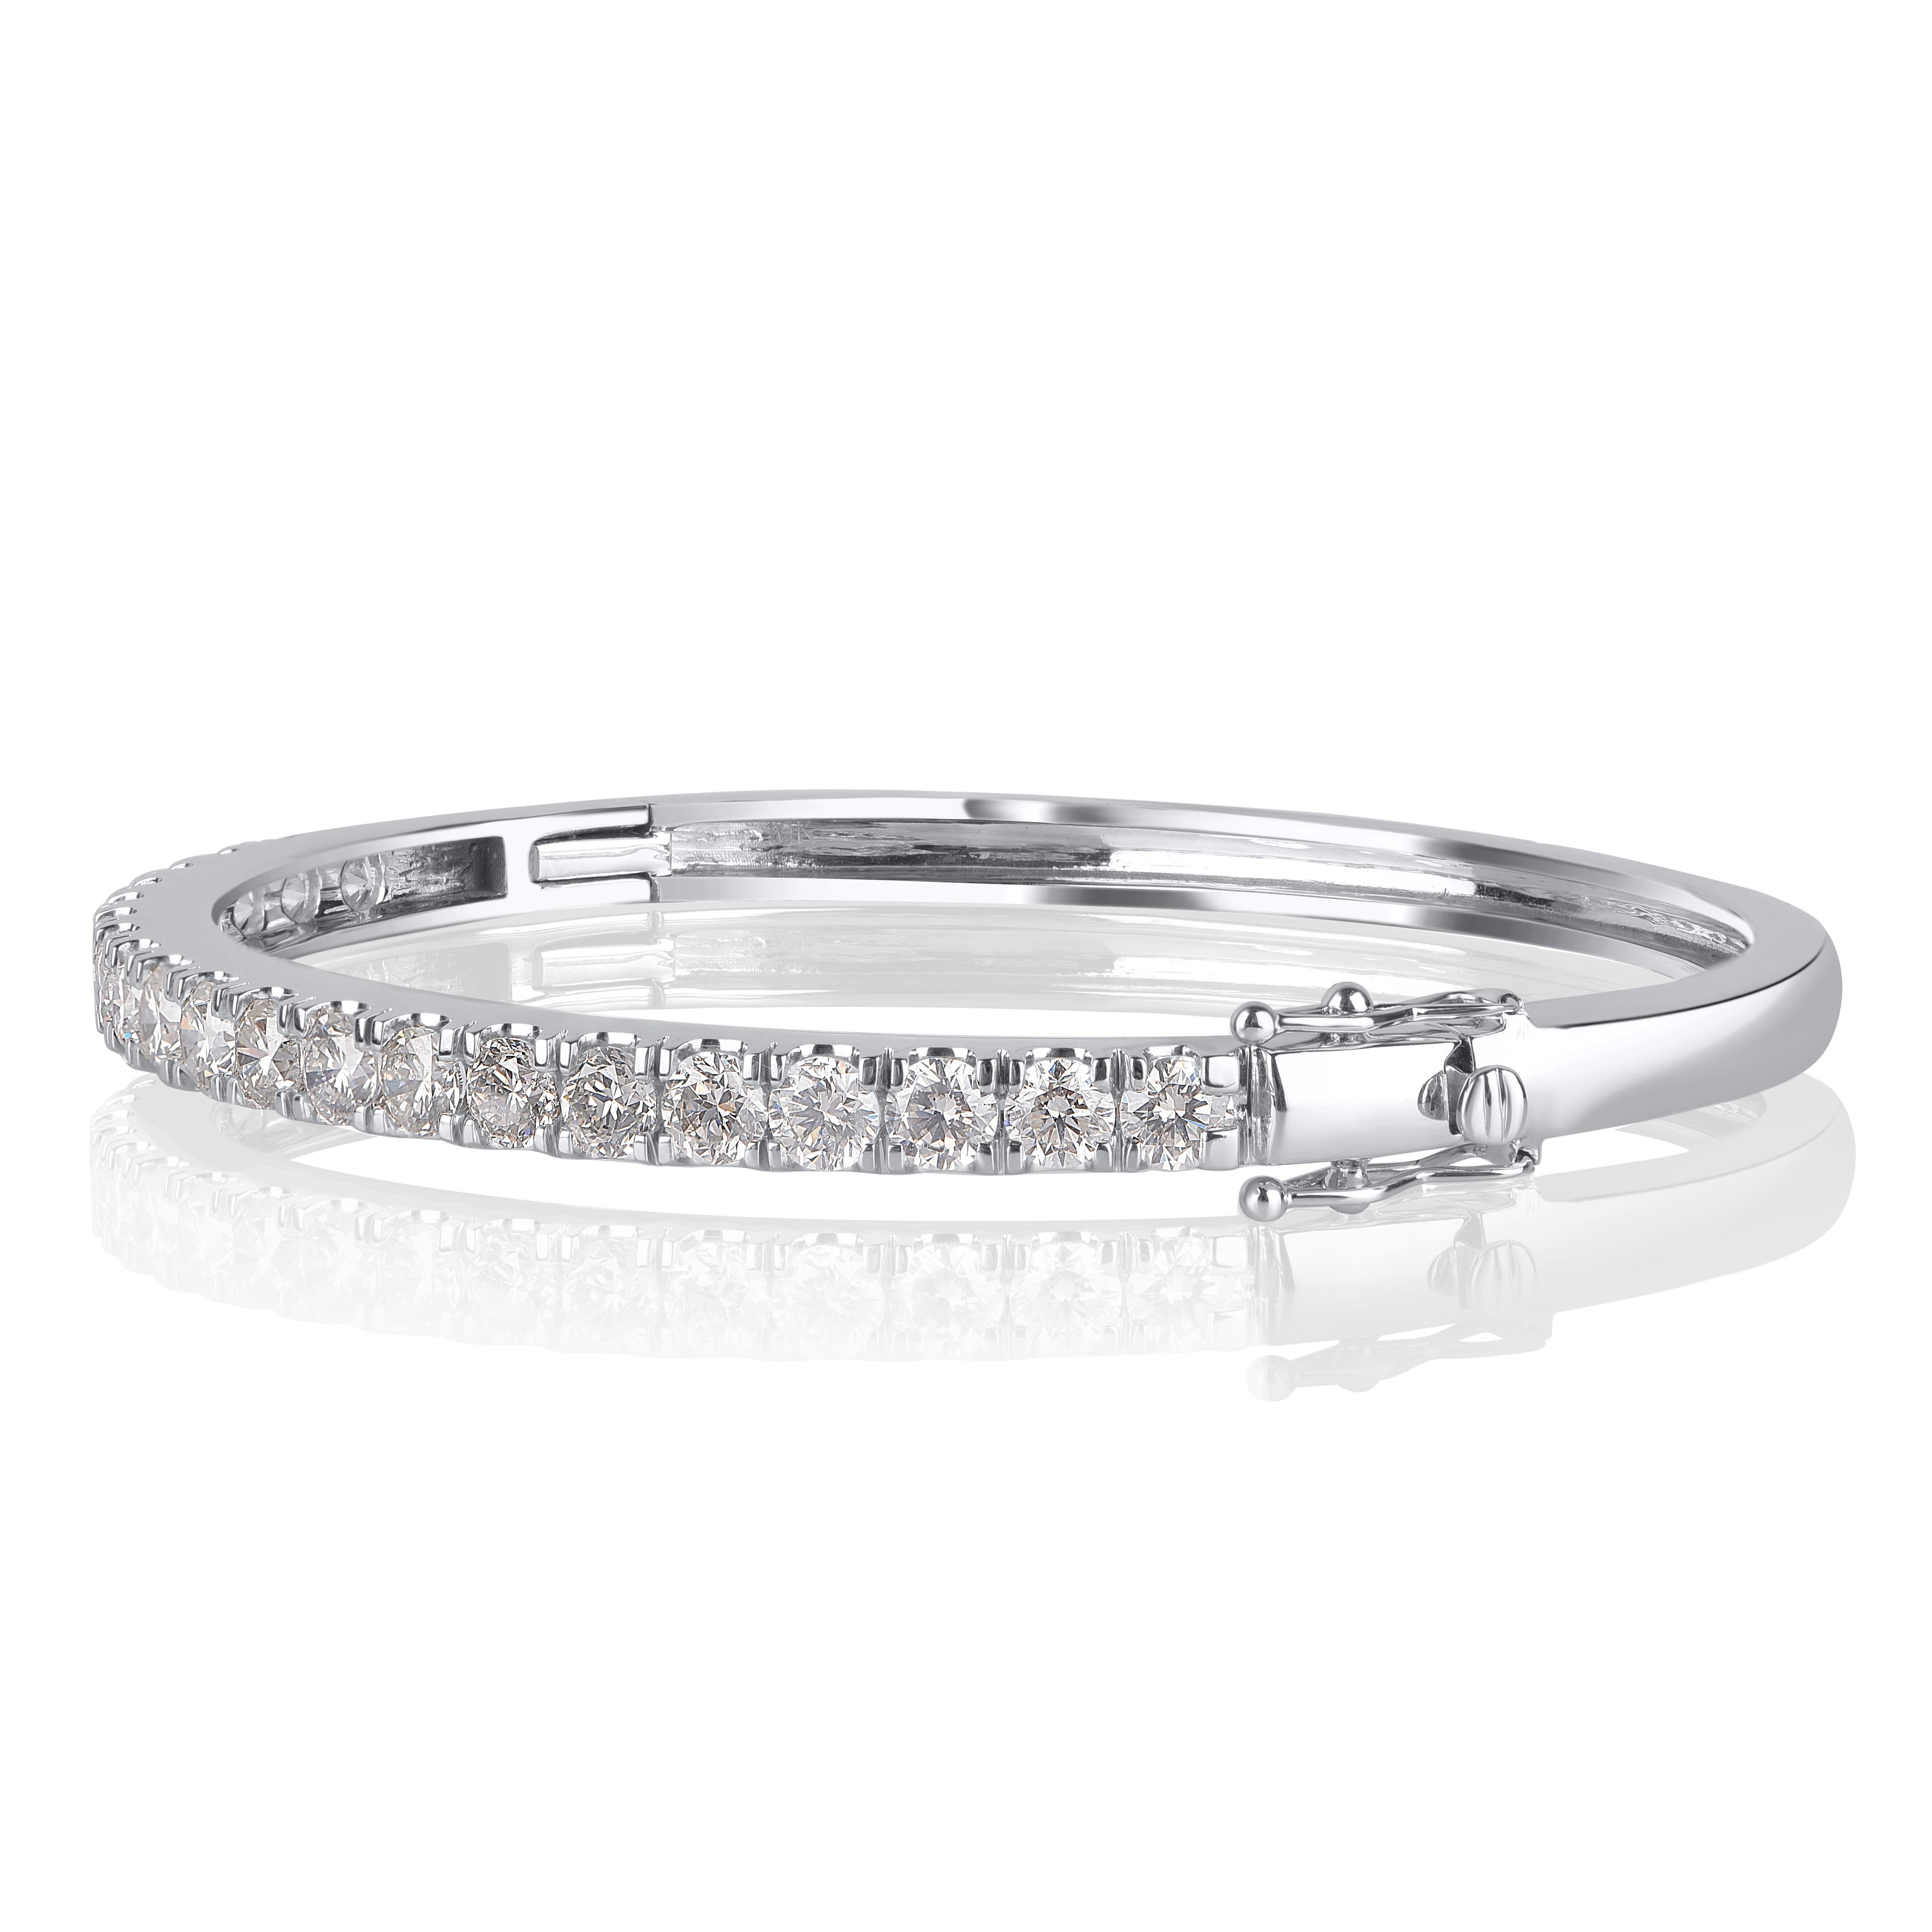 Hand-crafted by our in-house experts in 14 kt white gold, sparkling with 21 round-cut diamonds beautifully set in micro-prong setting. Diamonds in this bangle are graded HI Color, I1-I2 Clarity. This bangle is secured comfortably with pusher safety